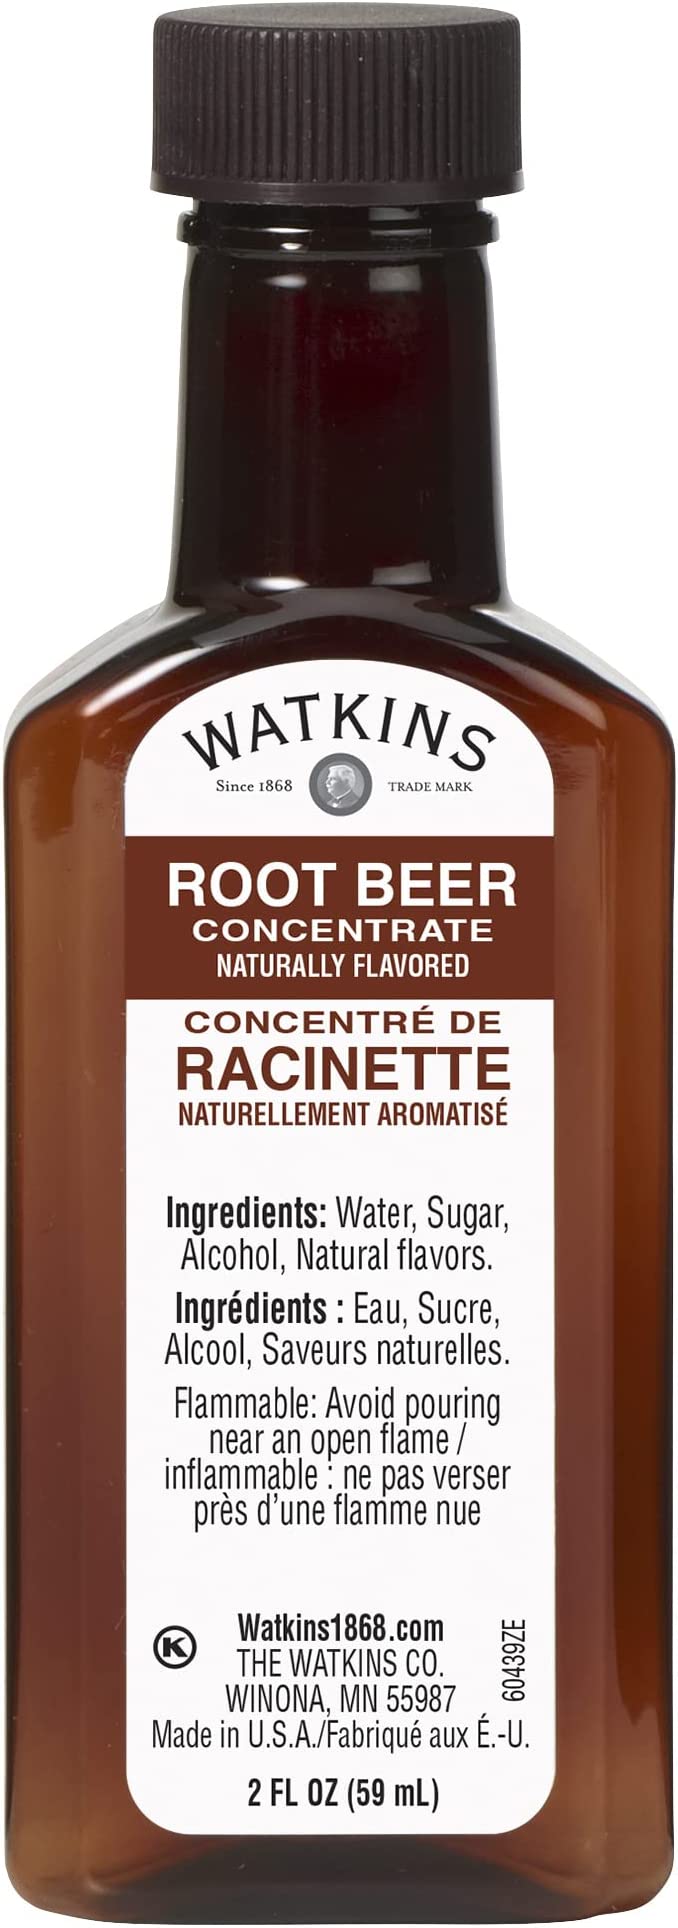 Watkins Root Beer Concentrate, Non-GMO, Kosher, 59ml, 1 Count